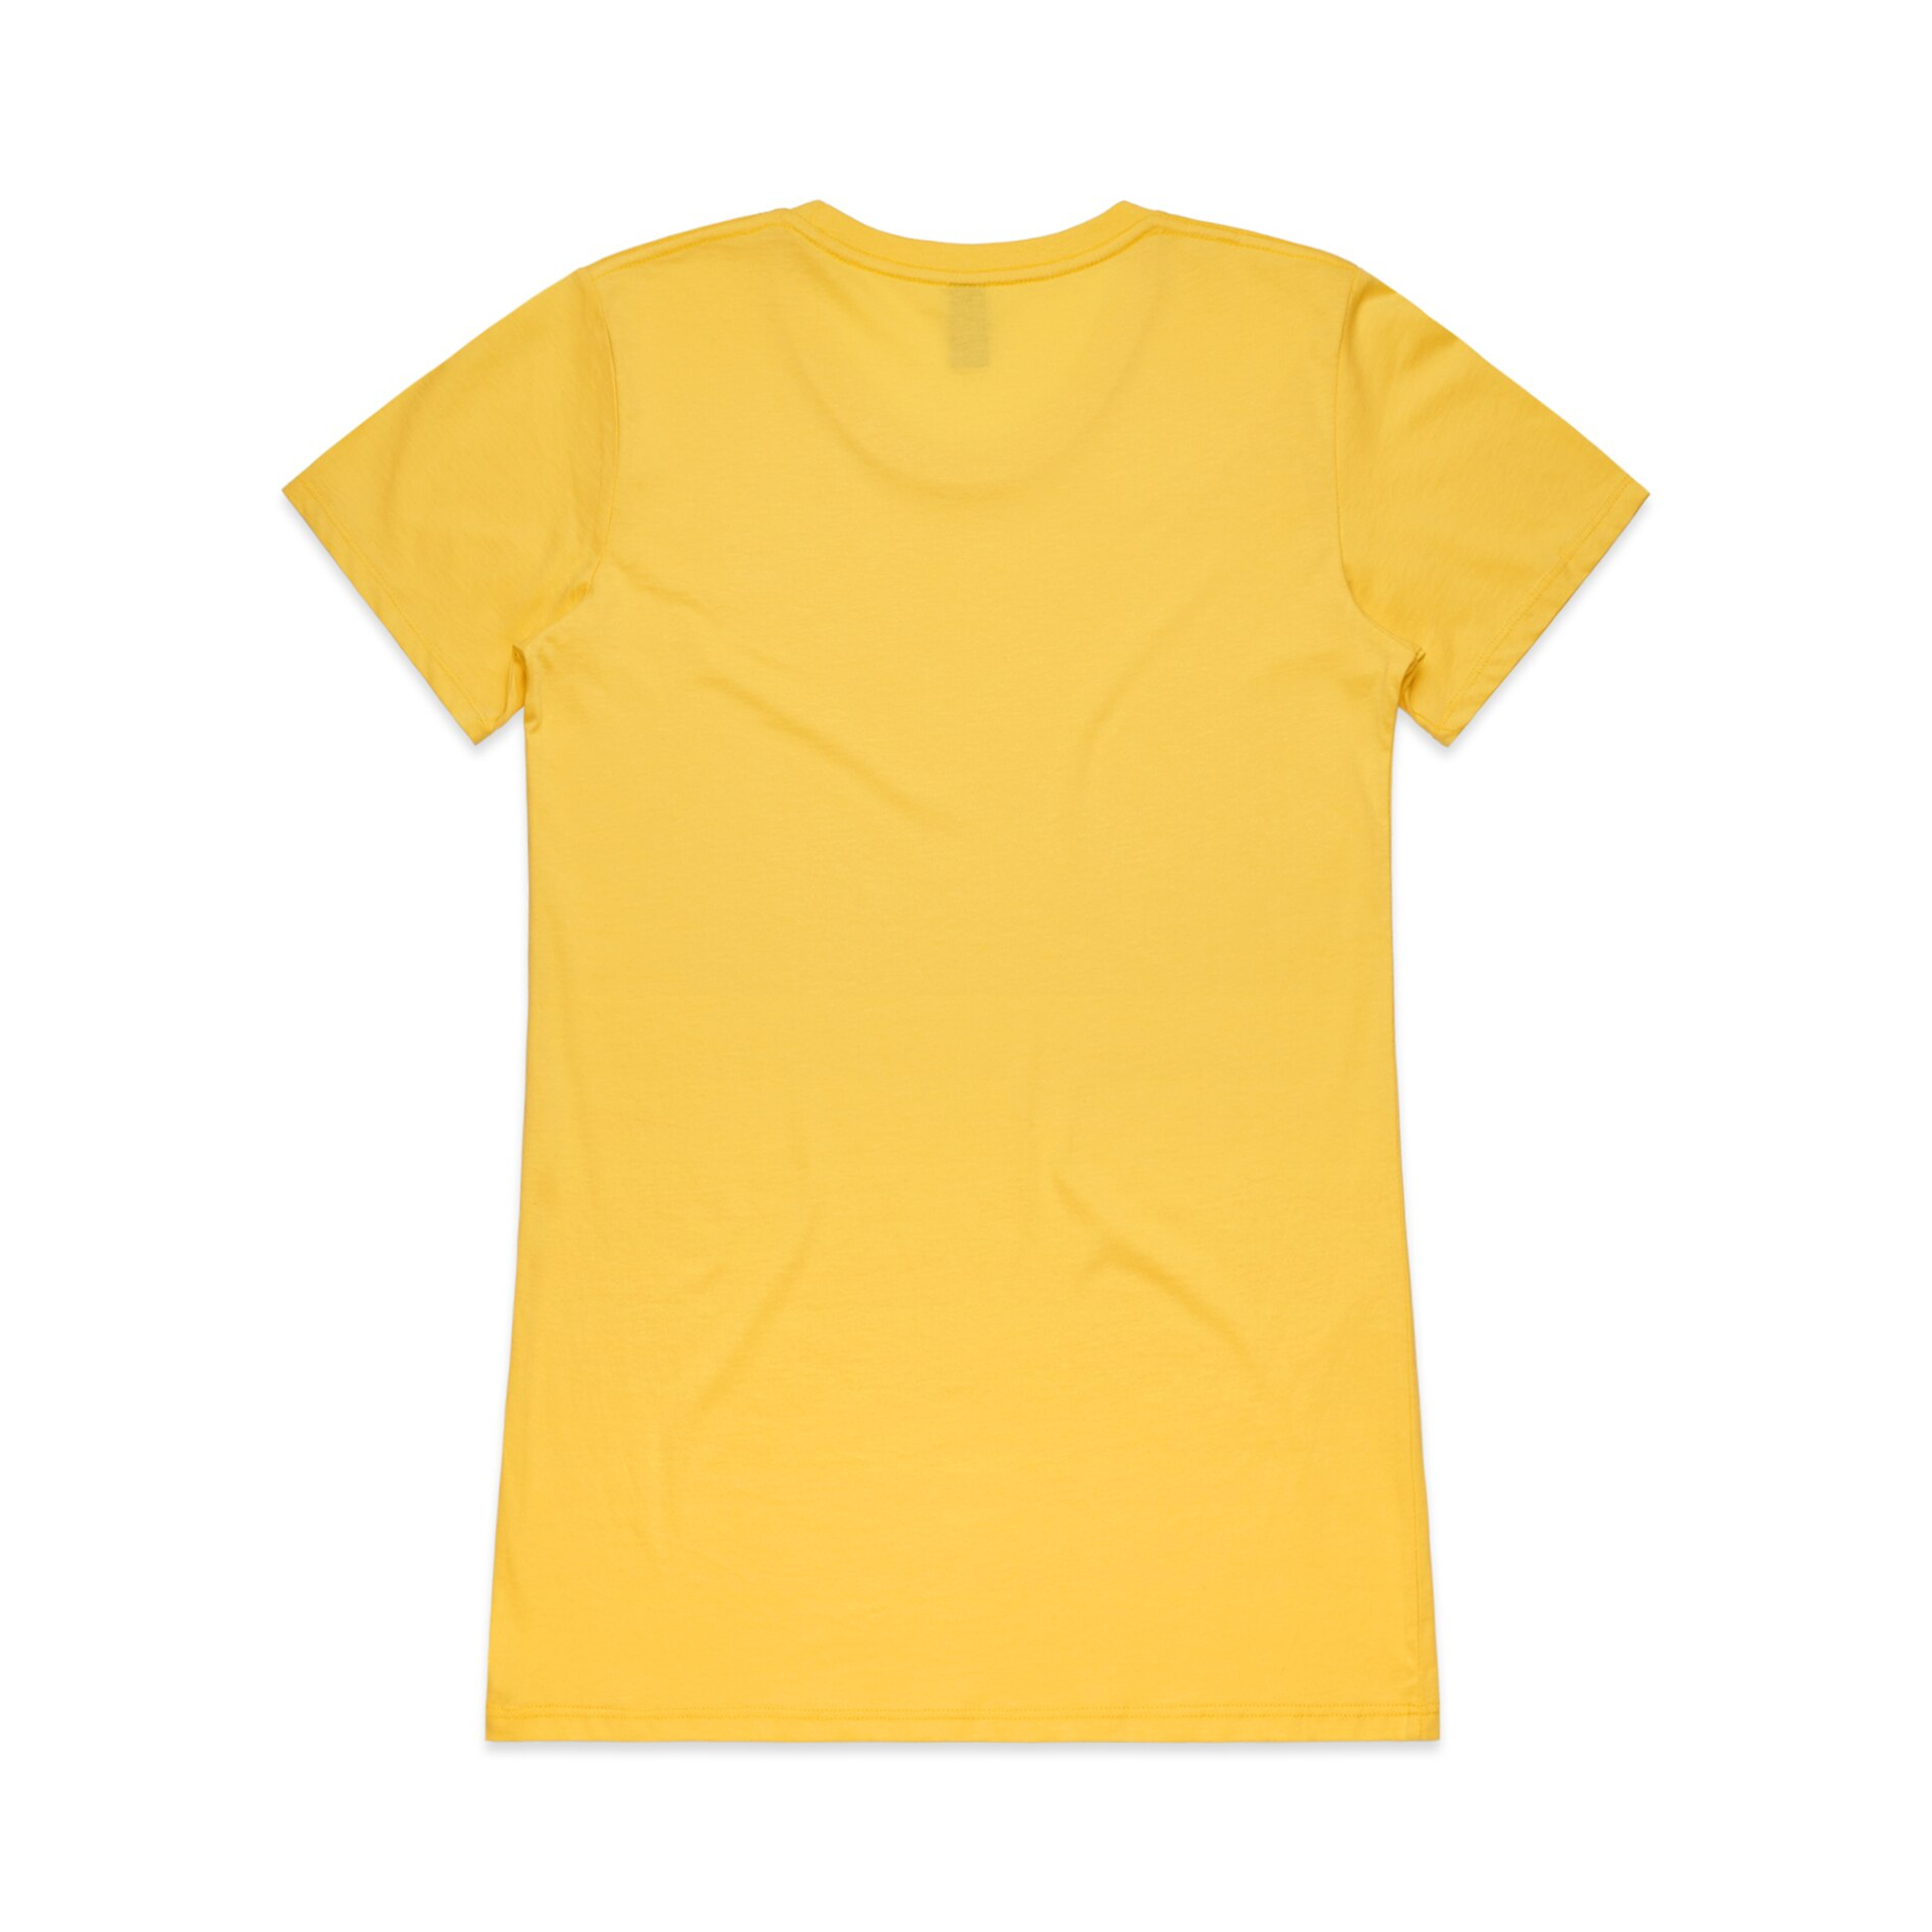 CANARY YELLOW - BACK